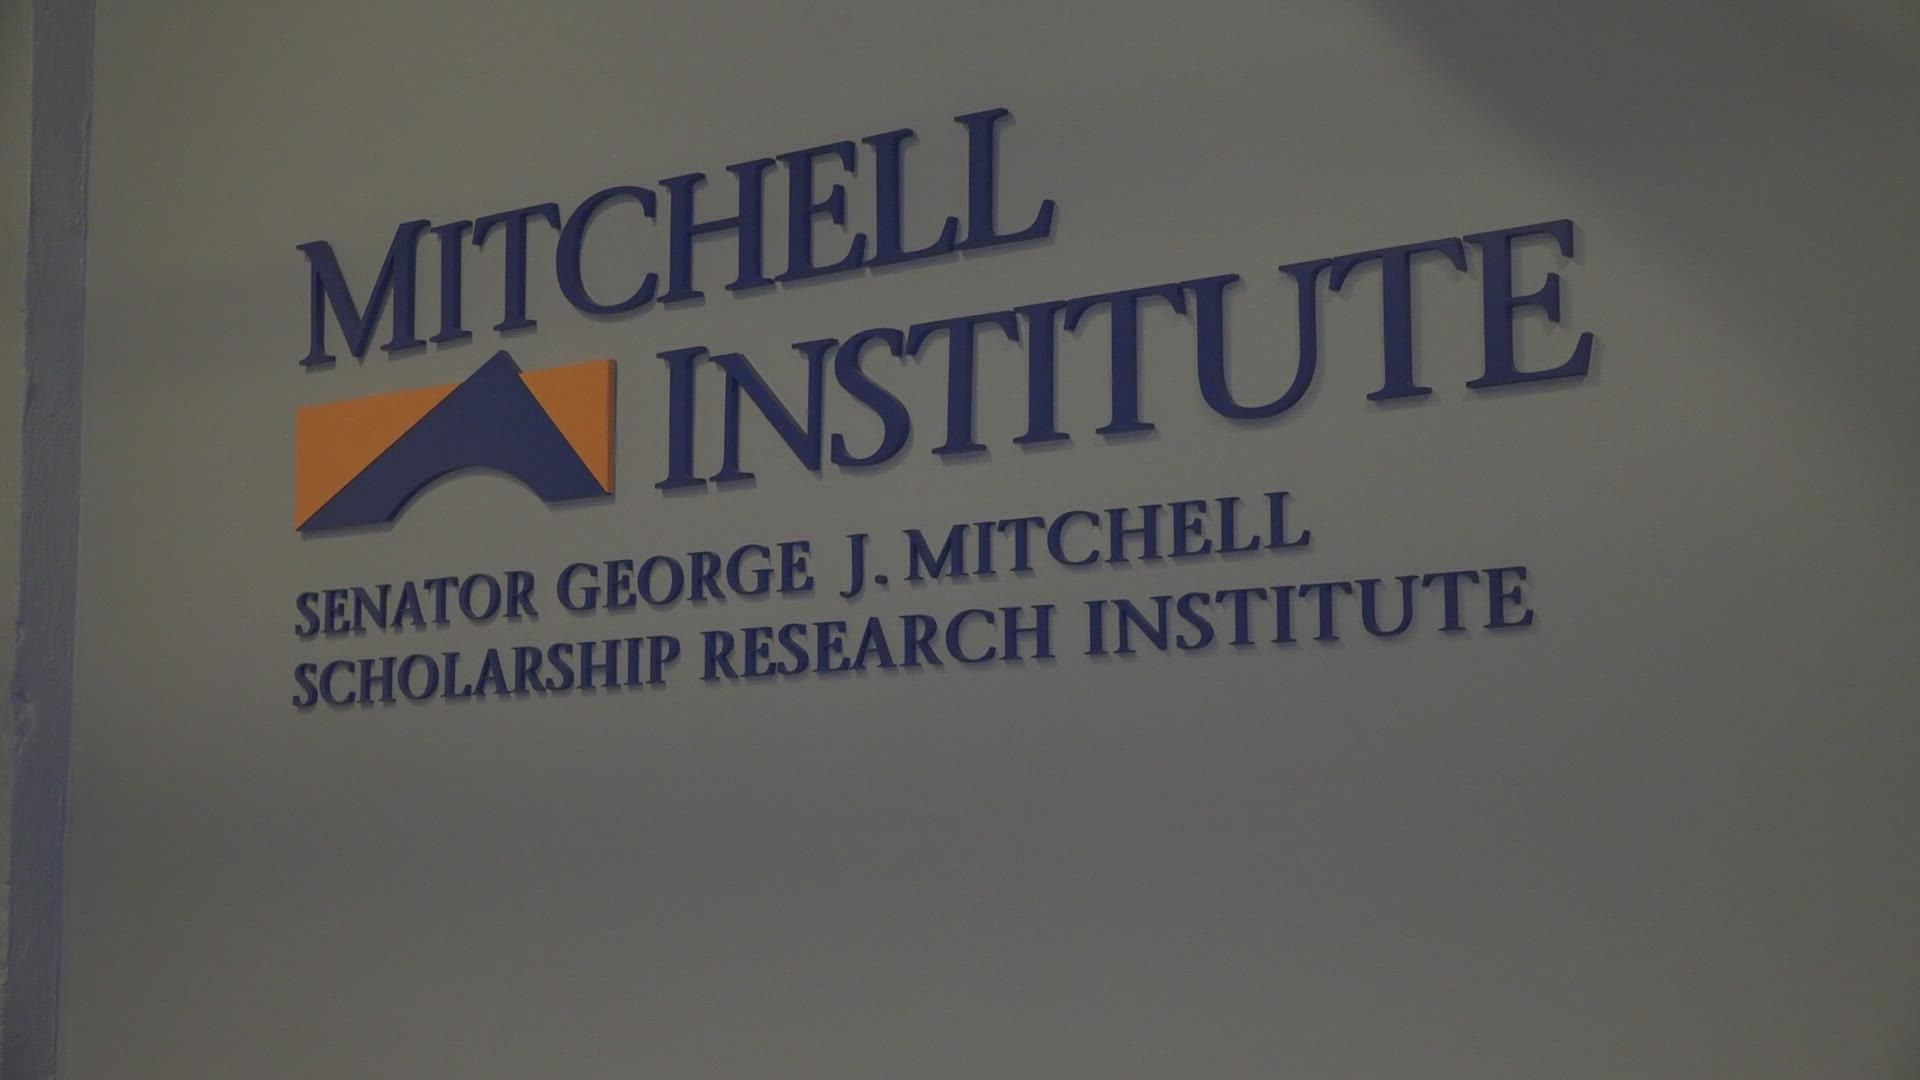 Every year since 1999, the Mitchell Institute has awarded a $10,000 scholarship to one student from every Maine public high school.